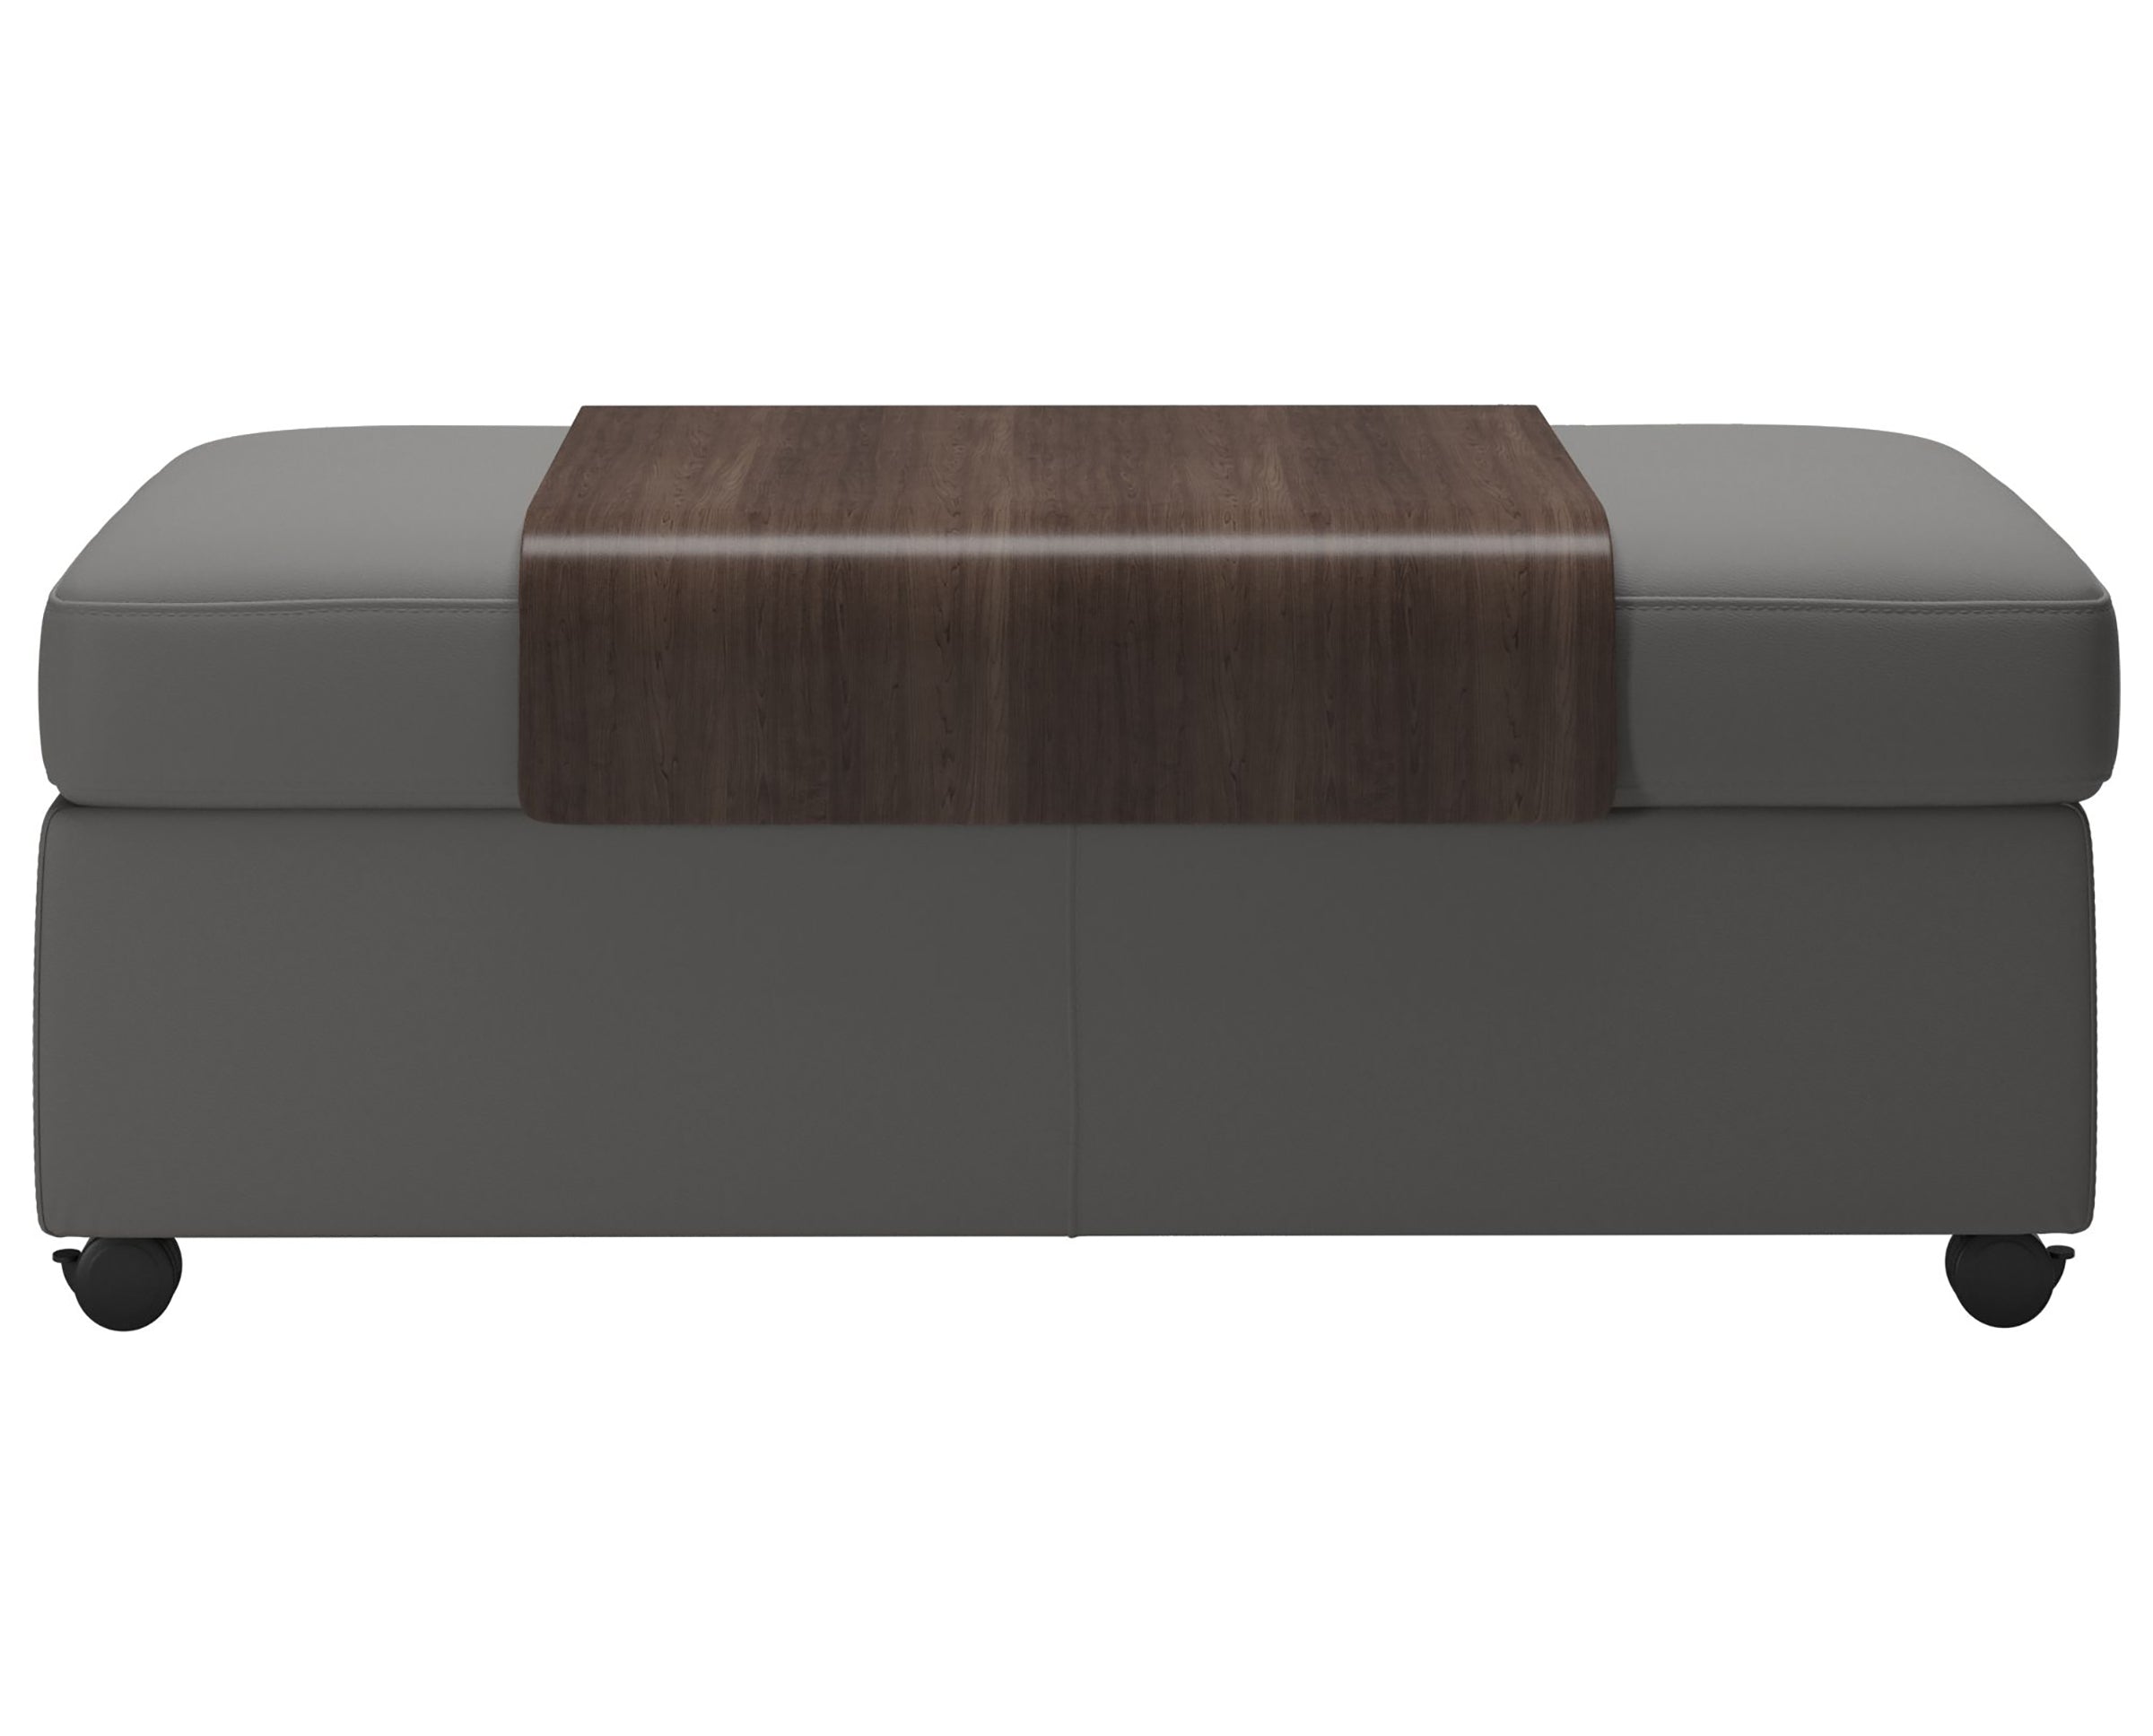 Paloma Leather Silver Grey and Wenge Finish | Stressless Double Ottoman with Table | Valley Ridge Furniture